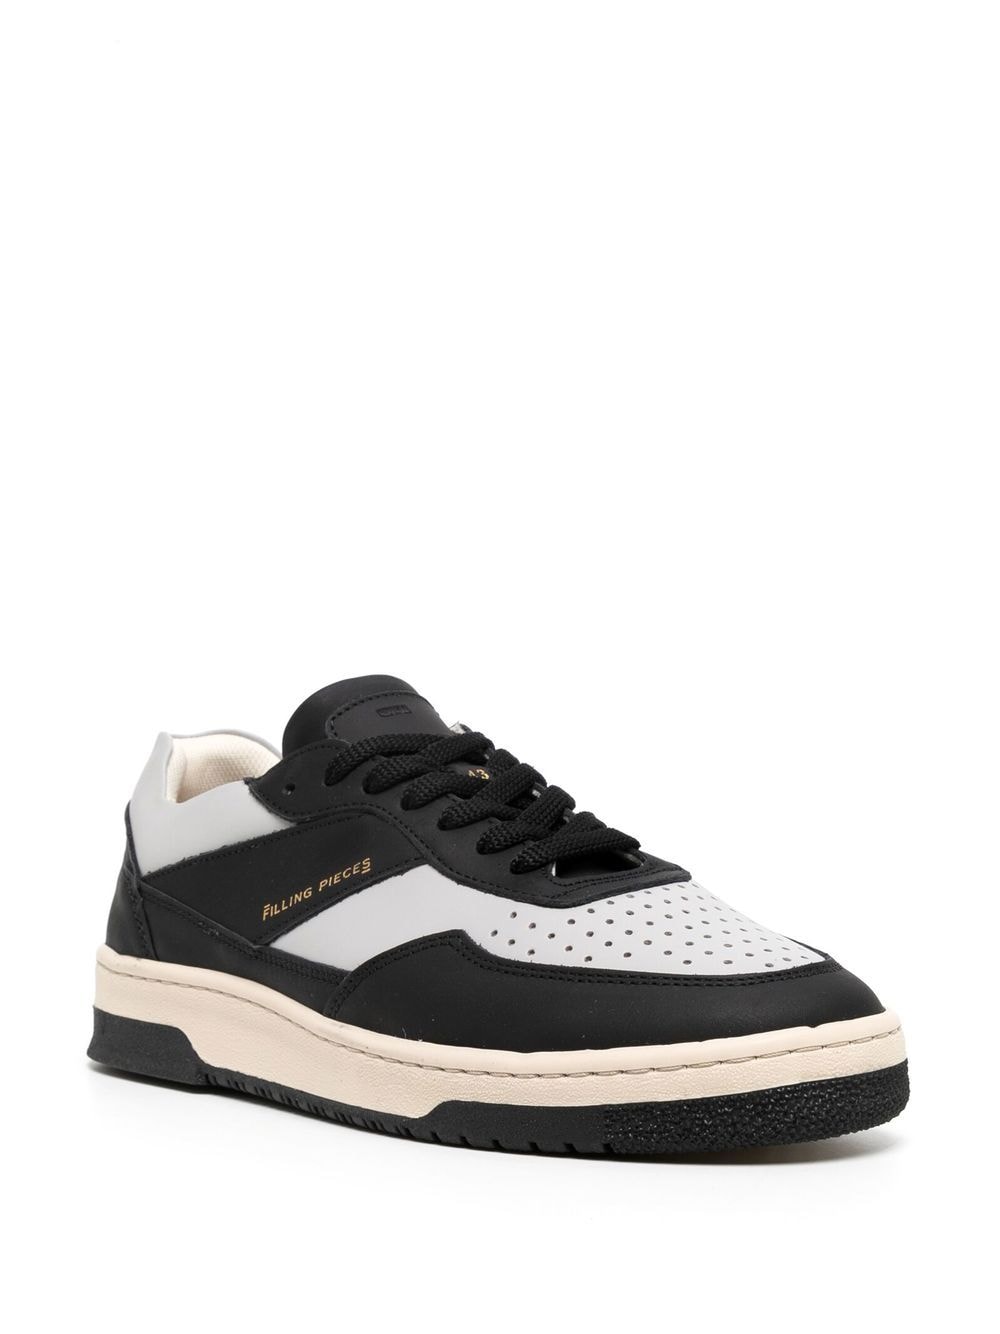 Filling Pieces Ace Spin low-top Sneakers - Farfetch